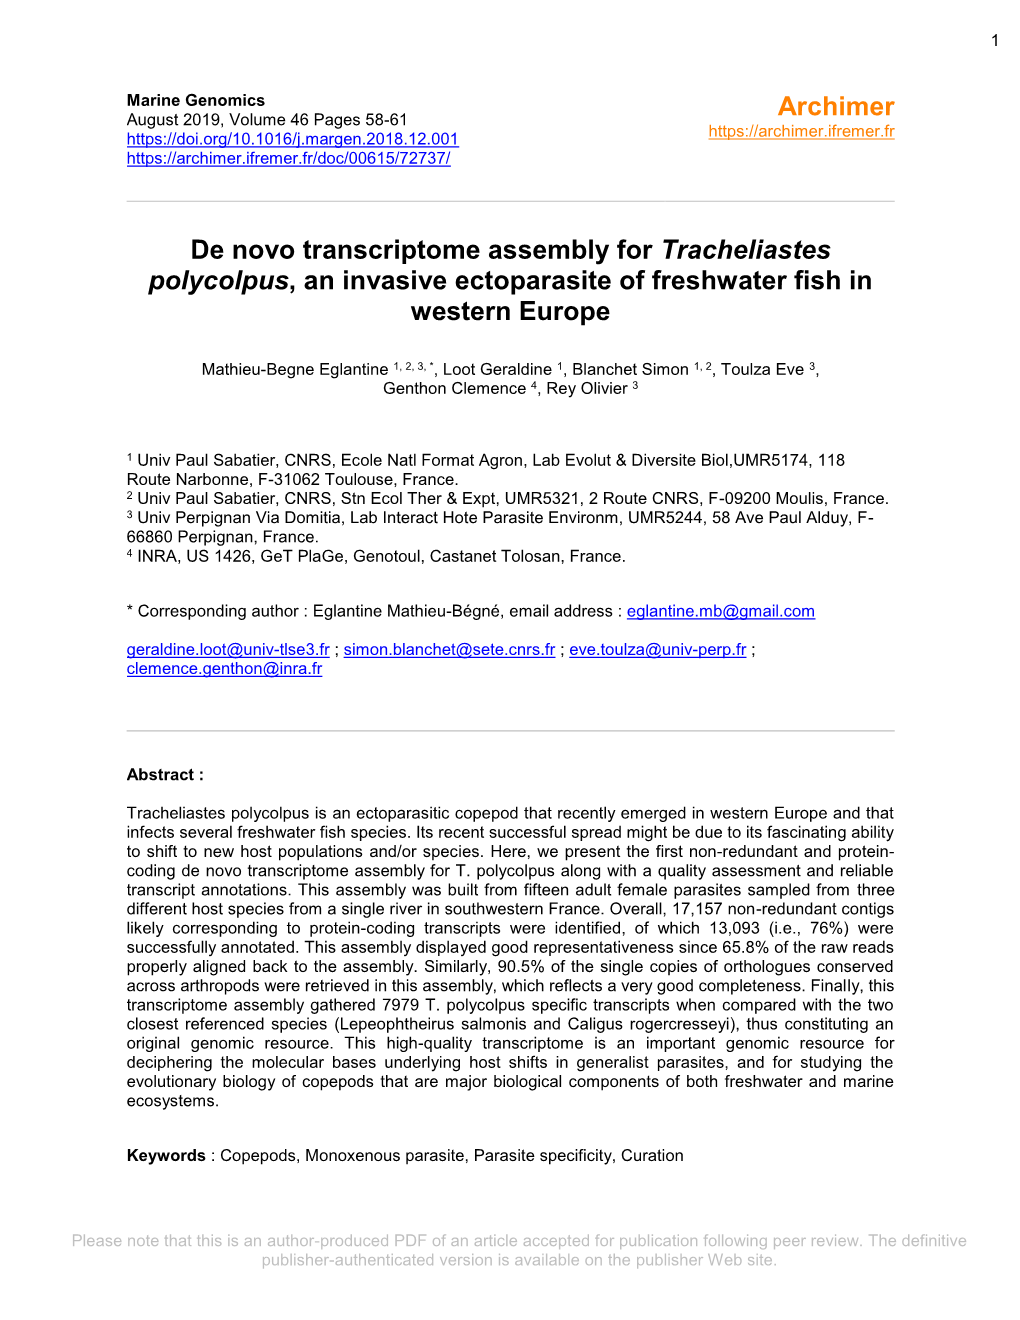 De Novo Transcriptome Assembly for Tracheliastes Polycolpus, an Invasive Ectoparasite of Freshwater Fish in Western Europe